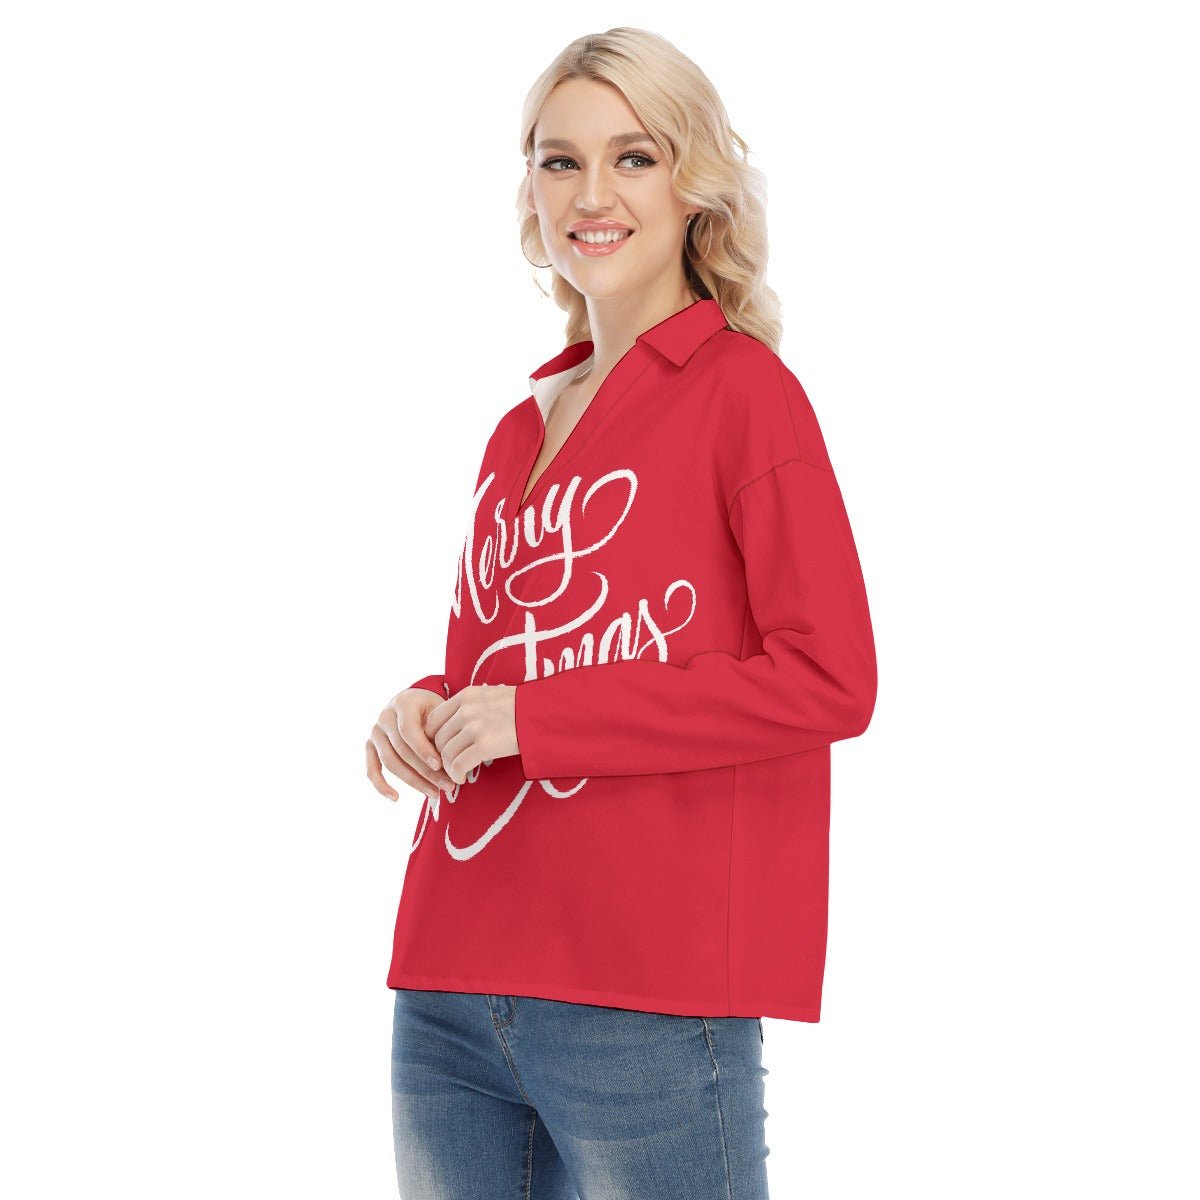 Women's Christmas Blouse - Merry Christmas - Red - Festive Style